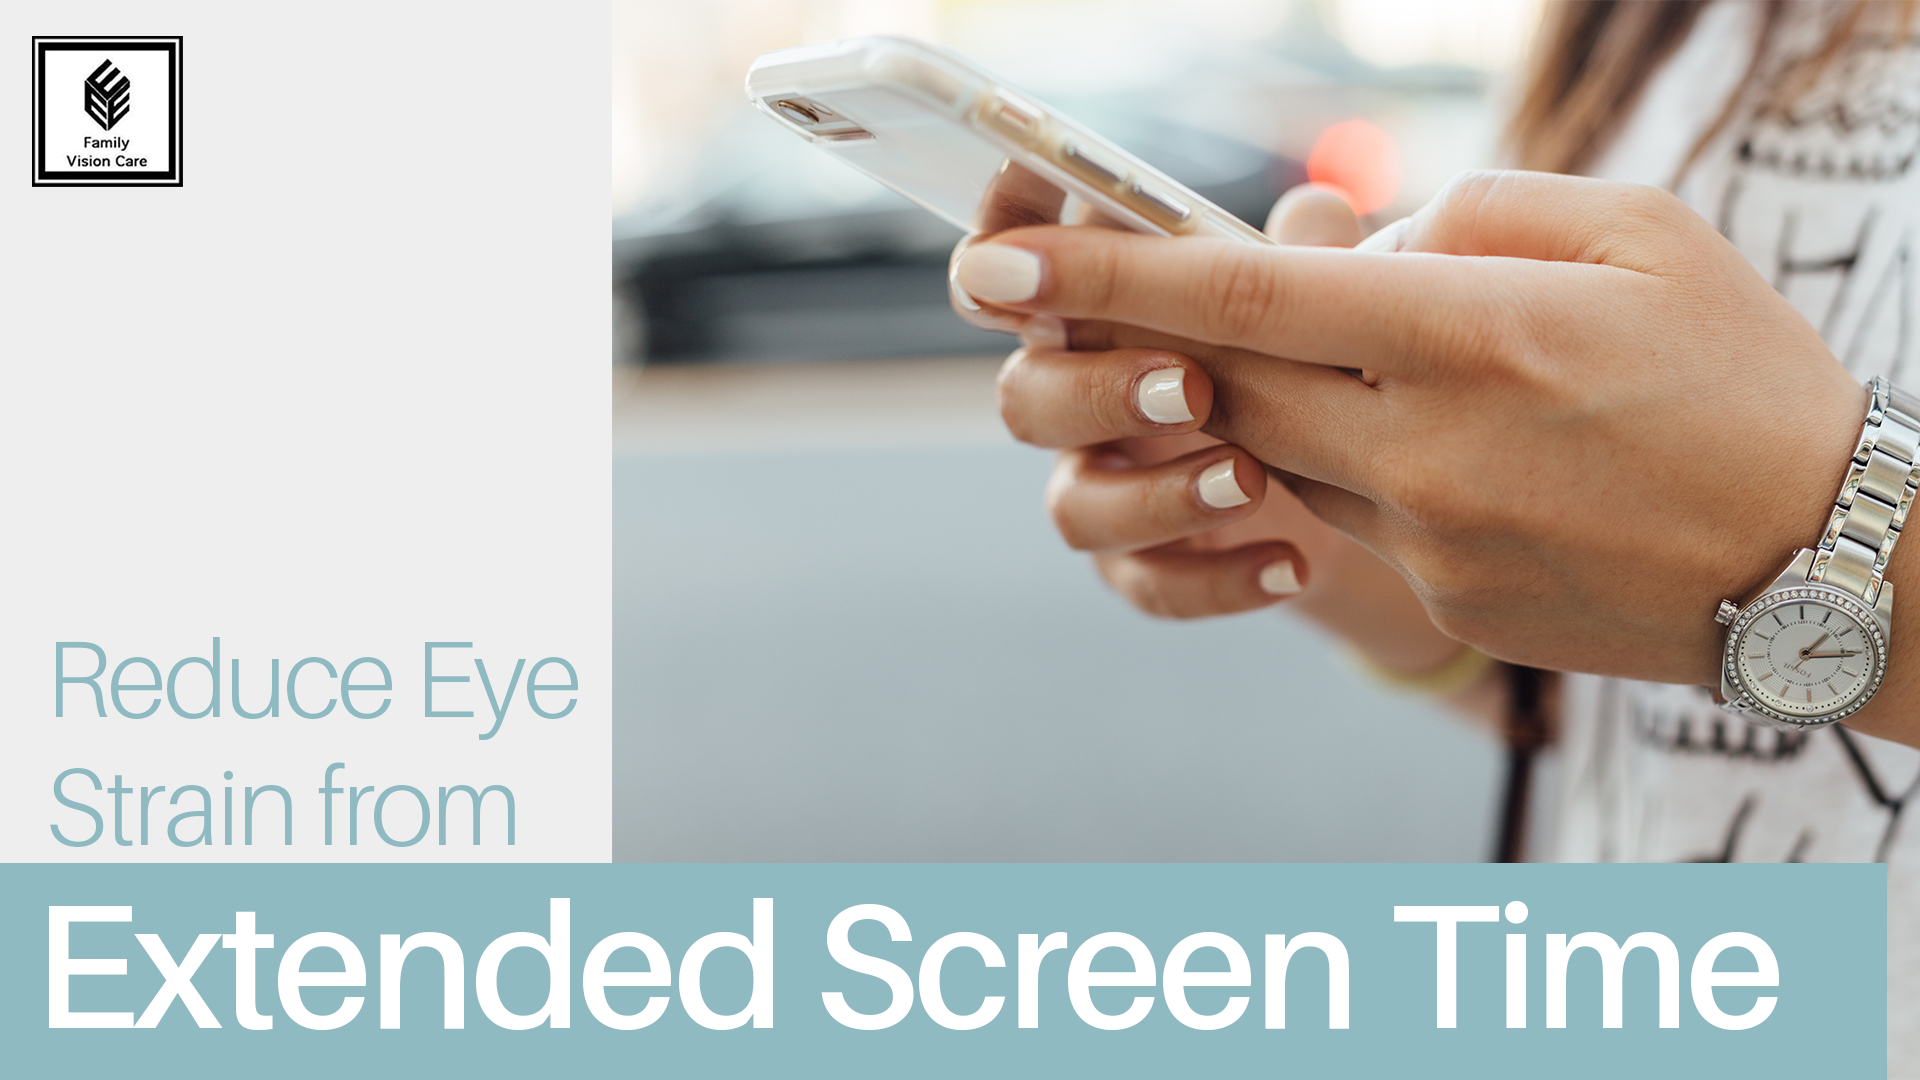 Two hands holding a smart phone with the text "Reduce Eye Strain from Extended Screen Time" 